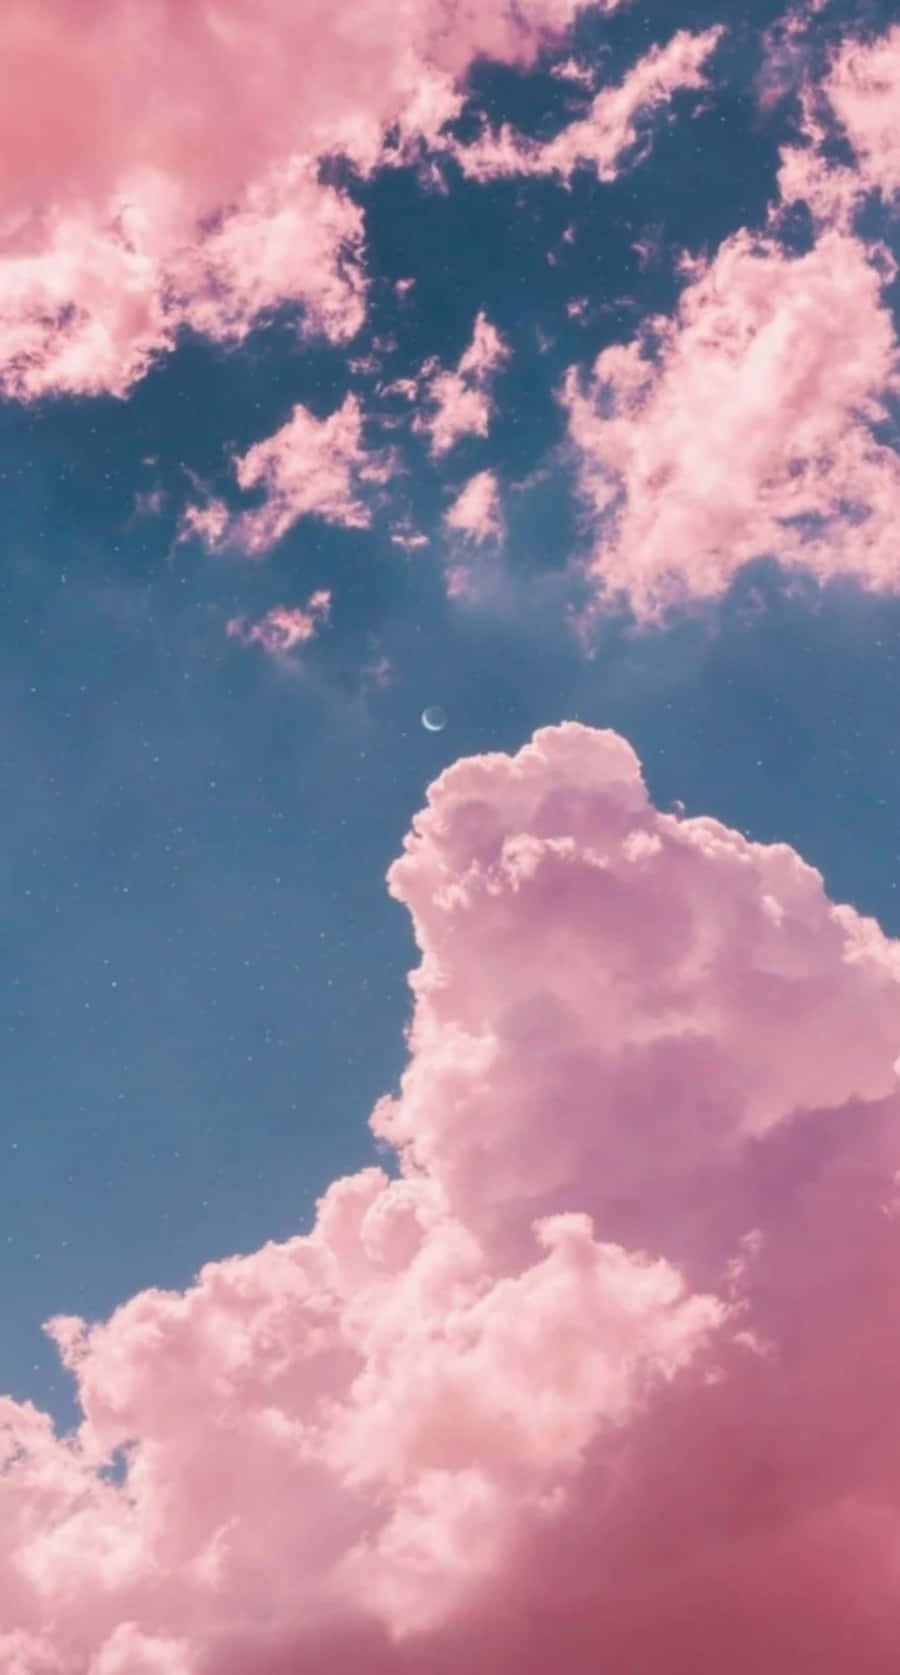 Pink Clouds In The Sky With A Moon